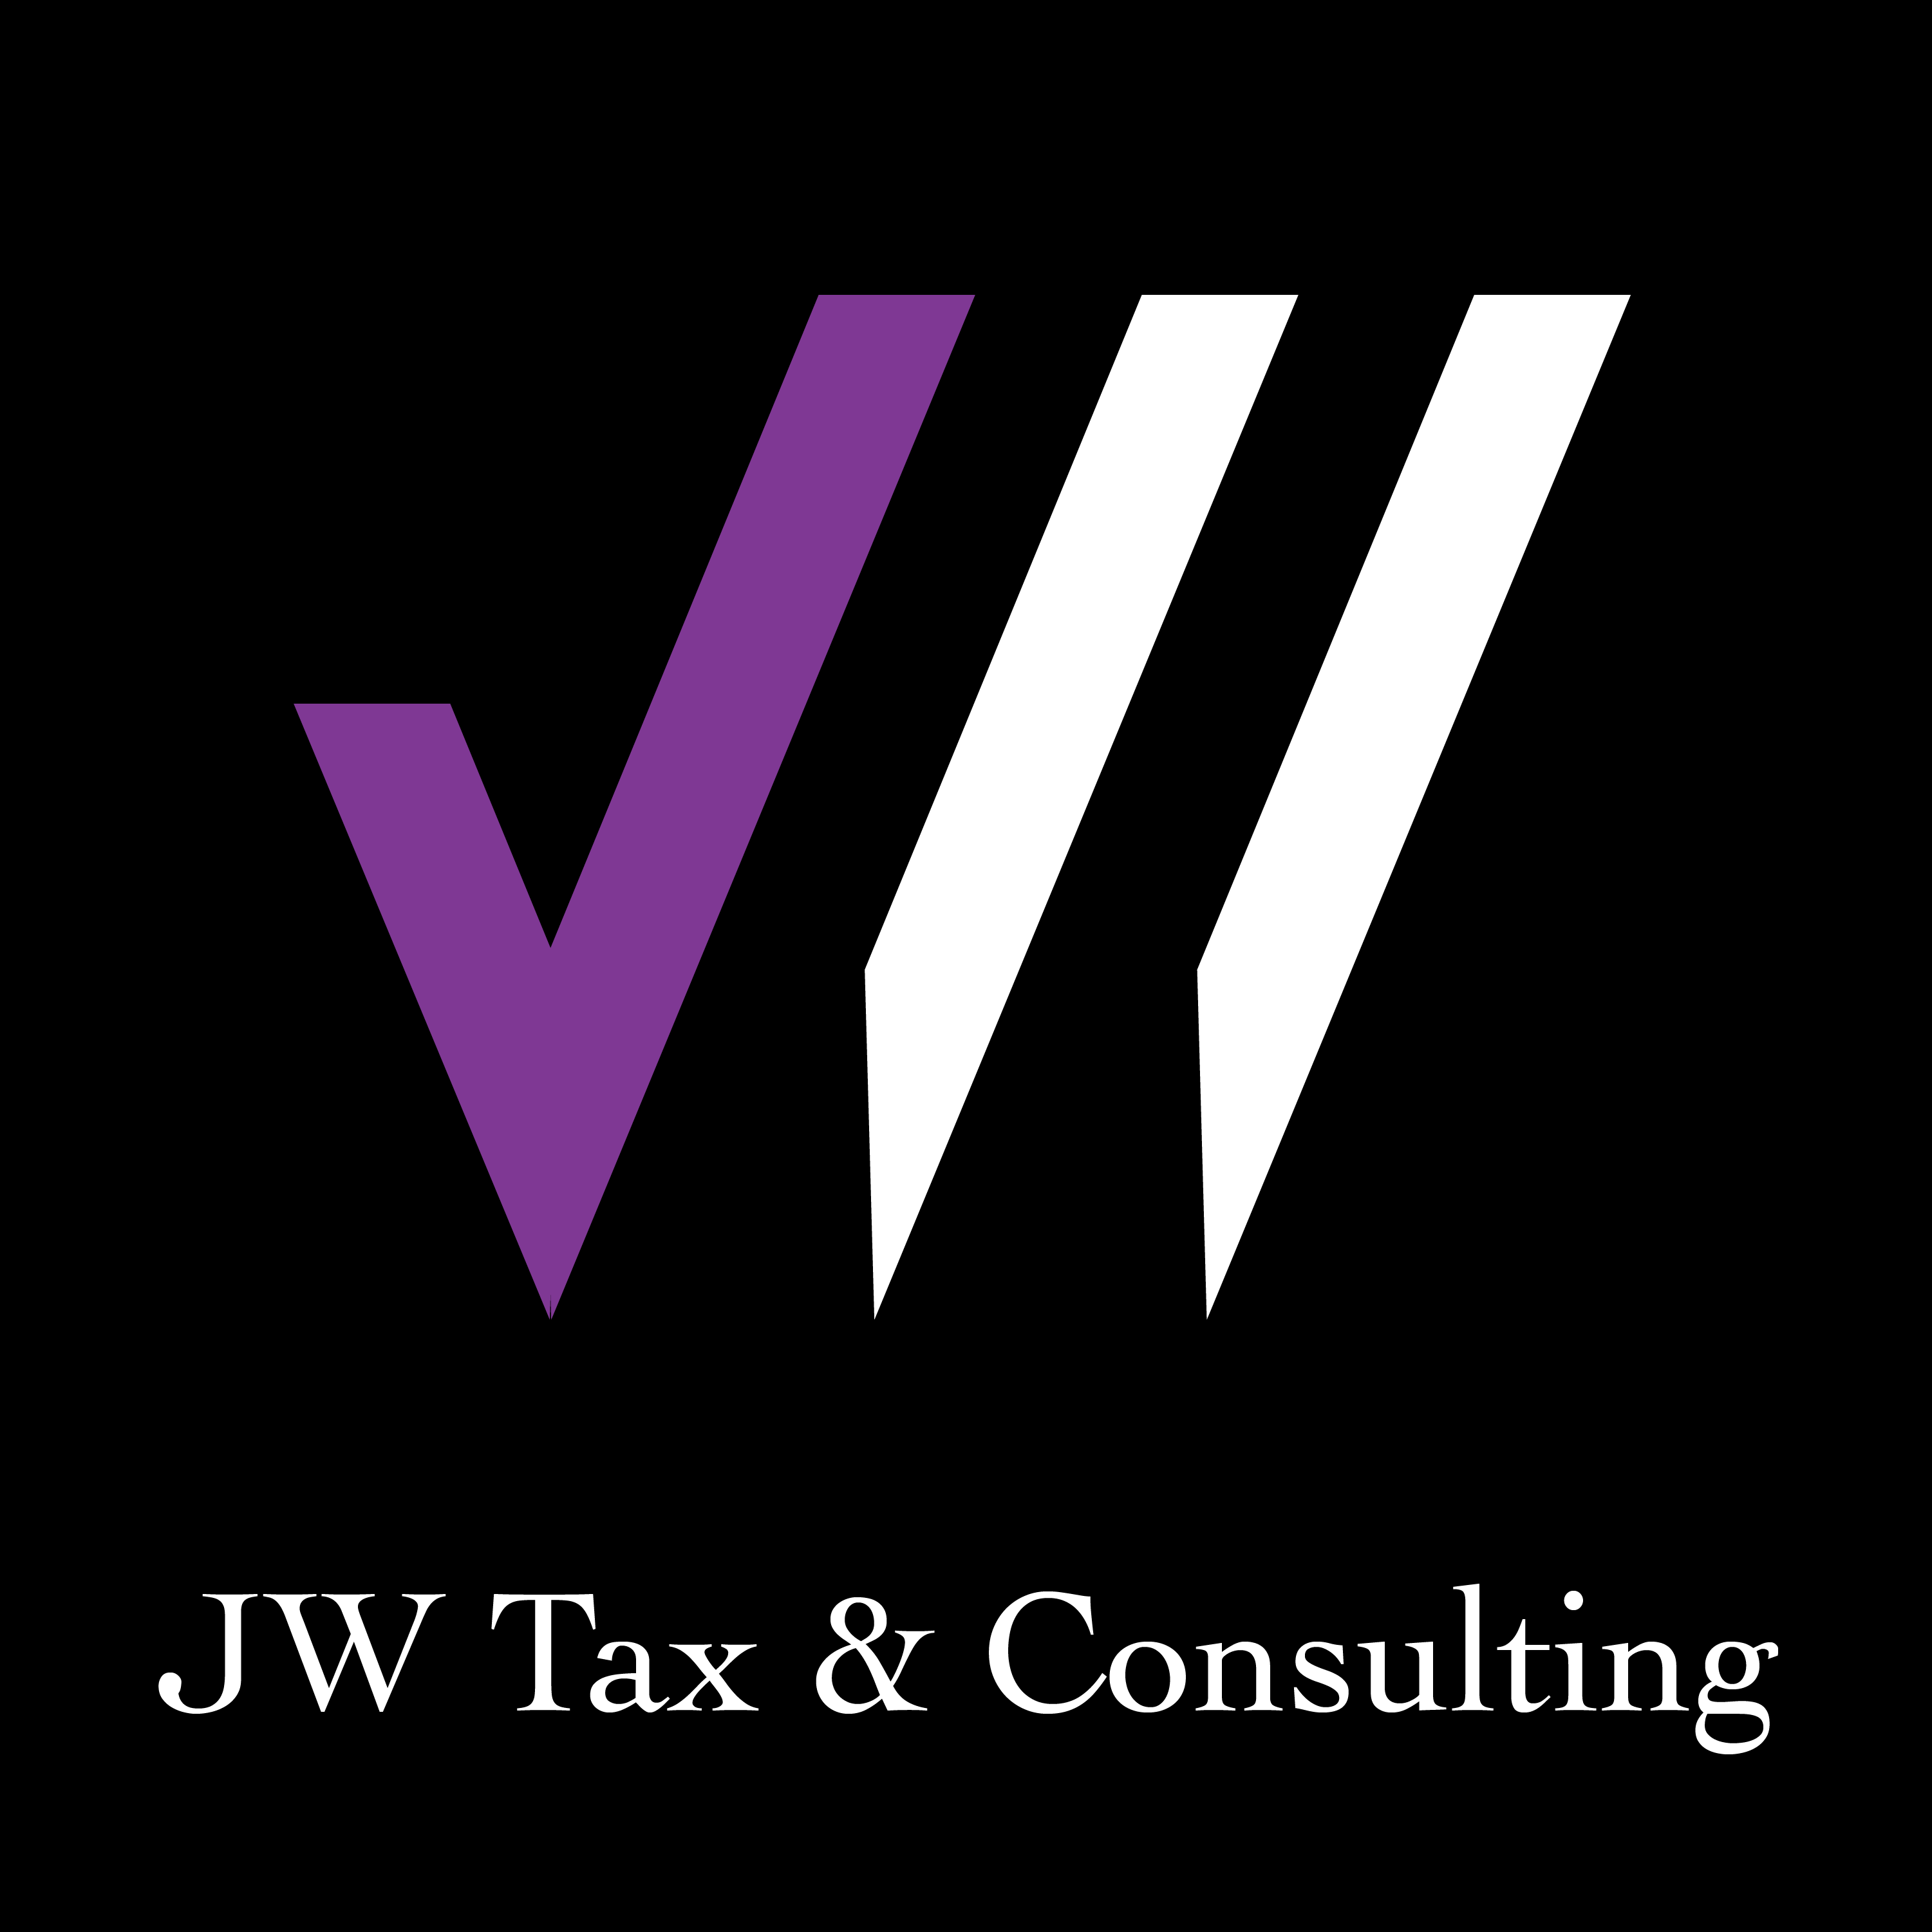 JW Tax & Consulting